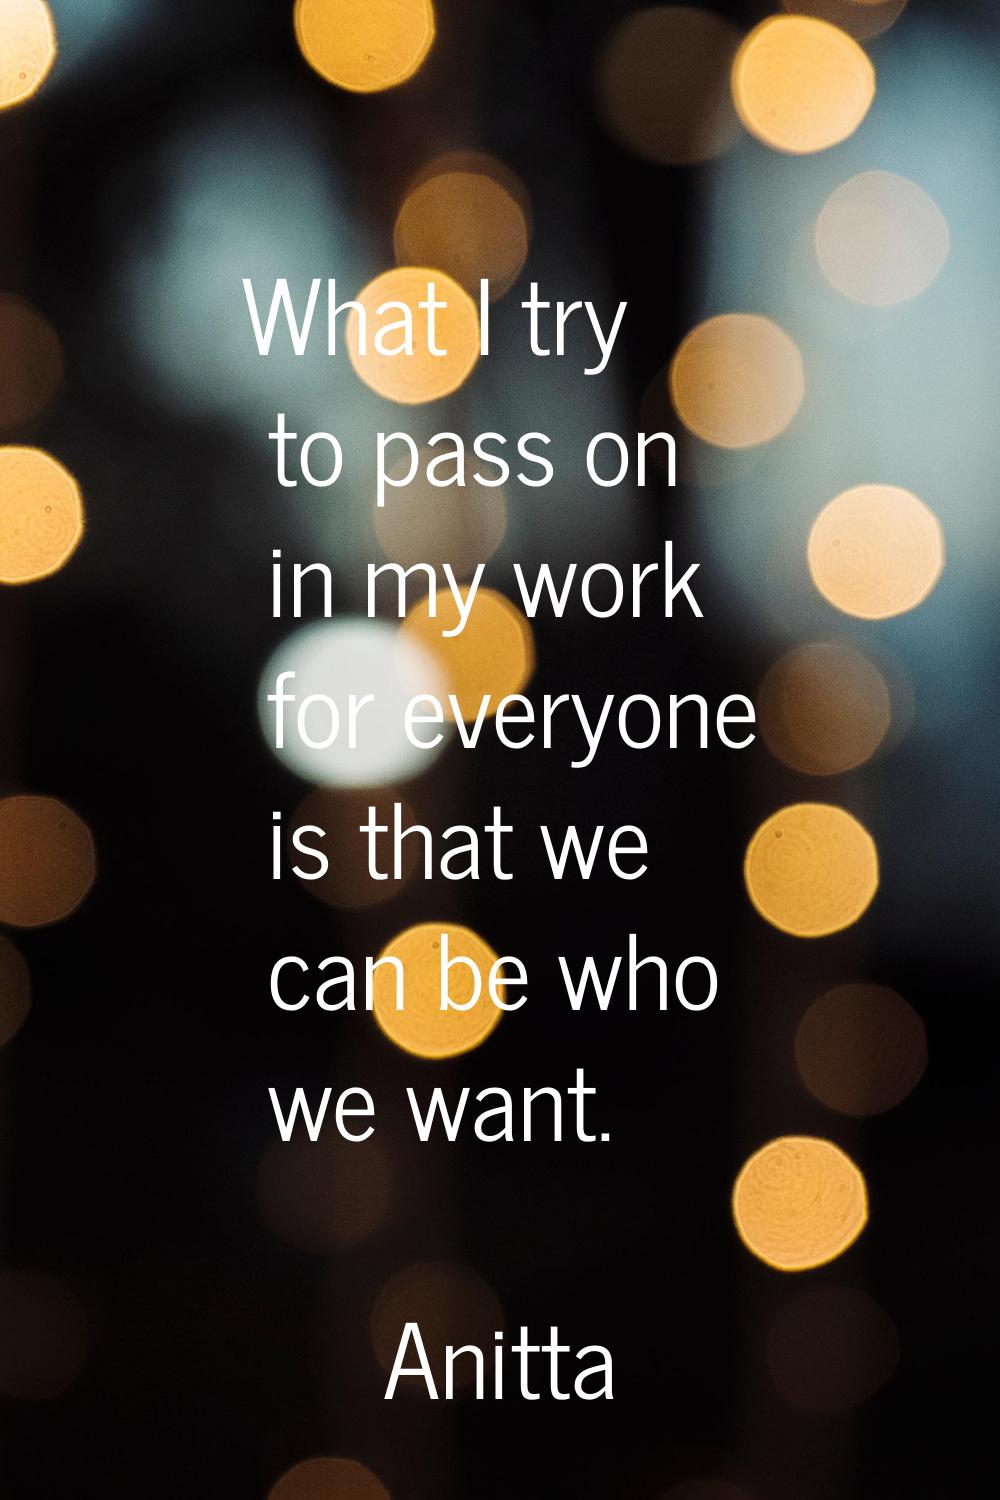 What I try to pass on in my work for everyone is that we can be who we want.